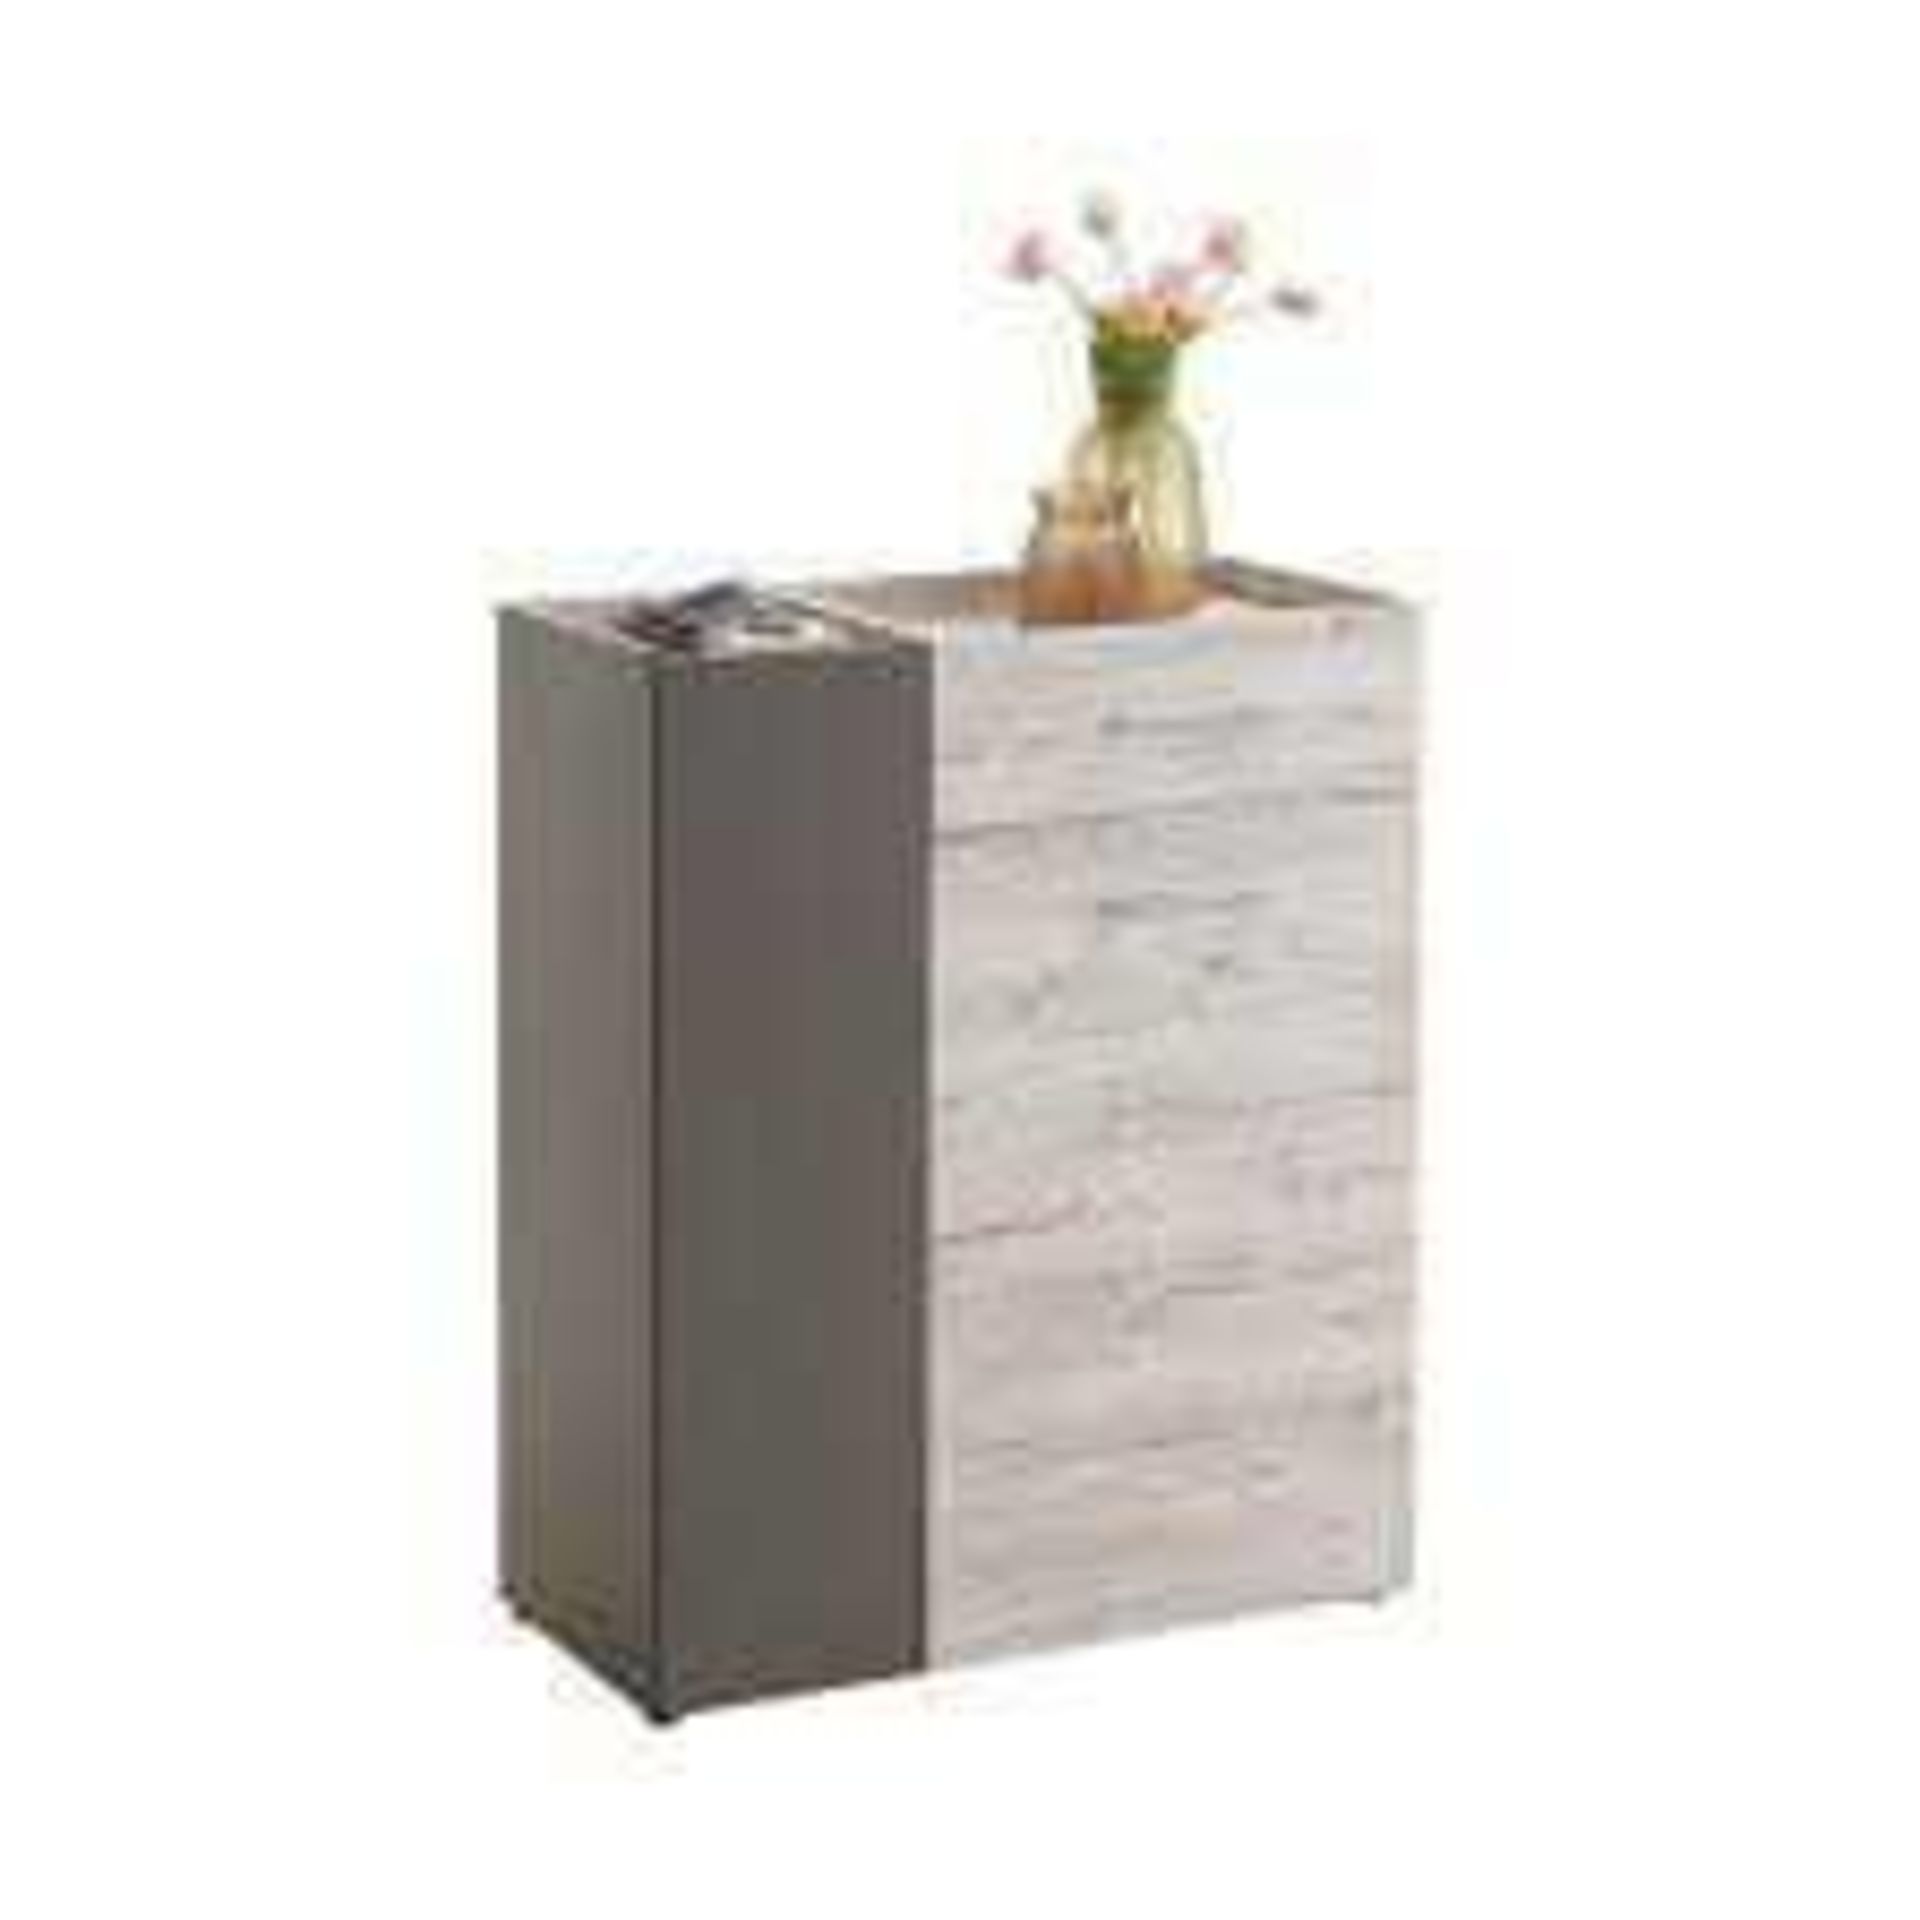 RRP £125. Boxed New Hoskin Shoe Cabinet 2 Doors - Sand Oak (Appraisals Available On Request)(